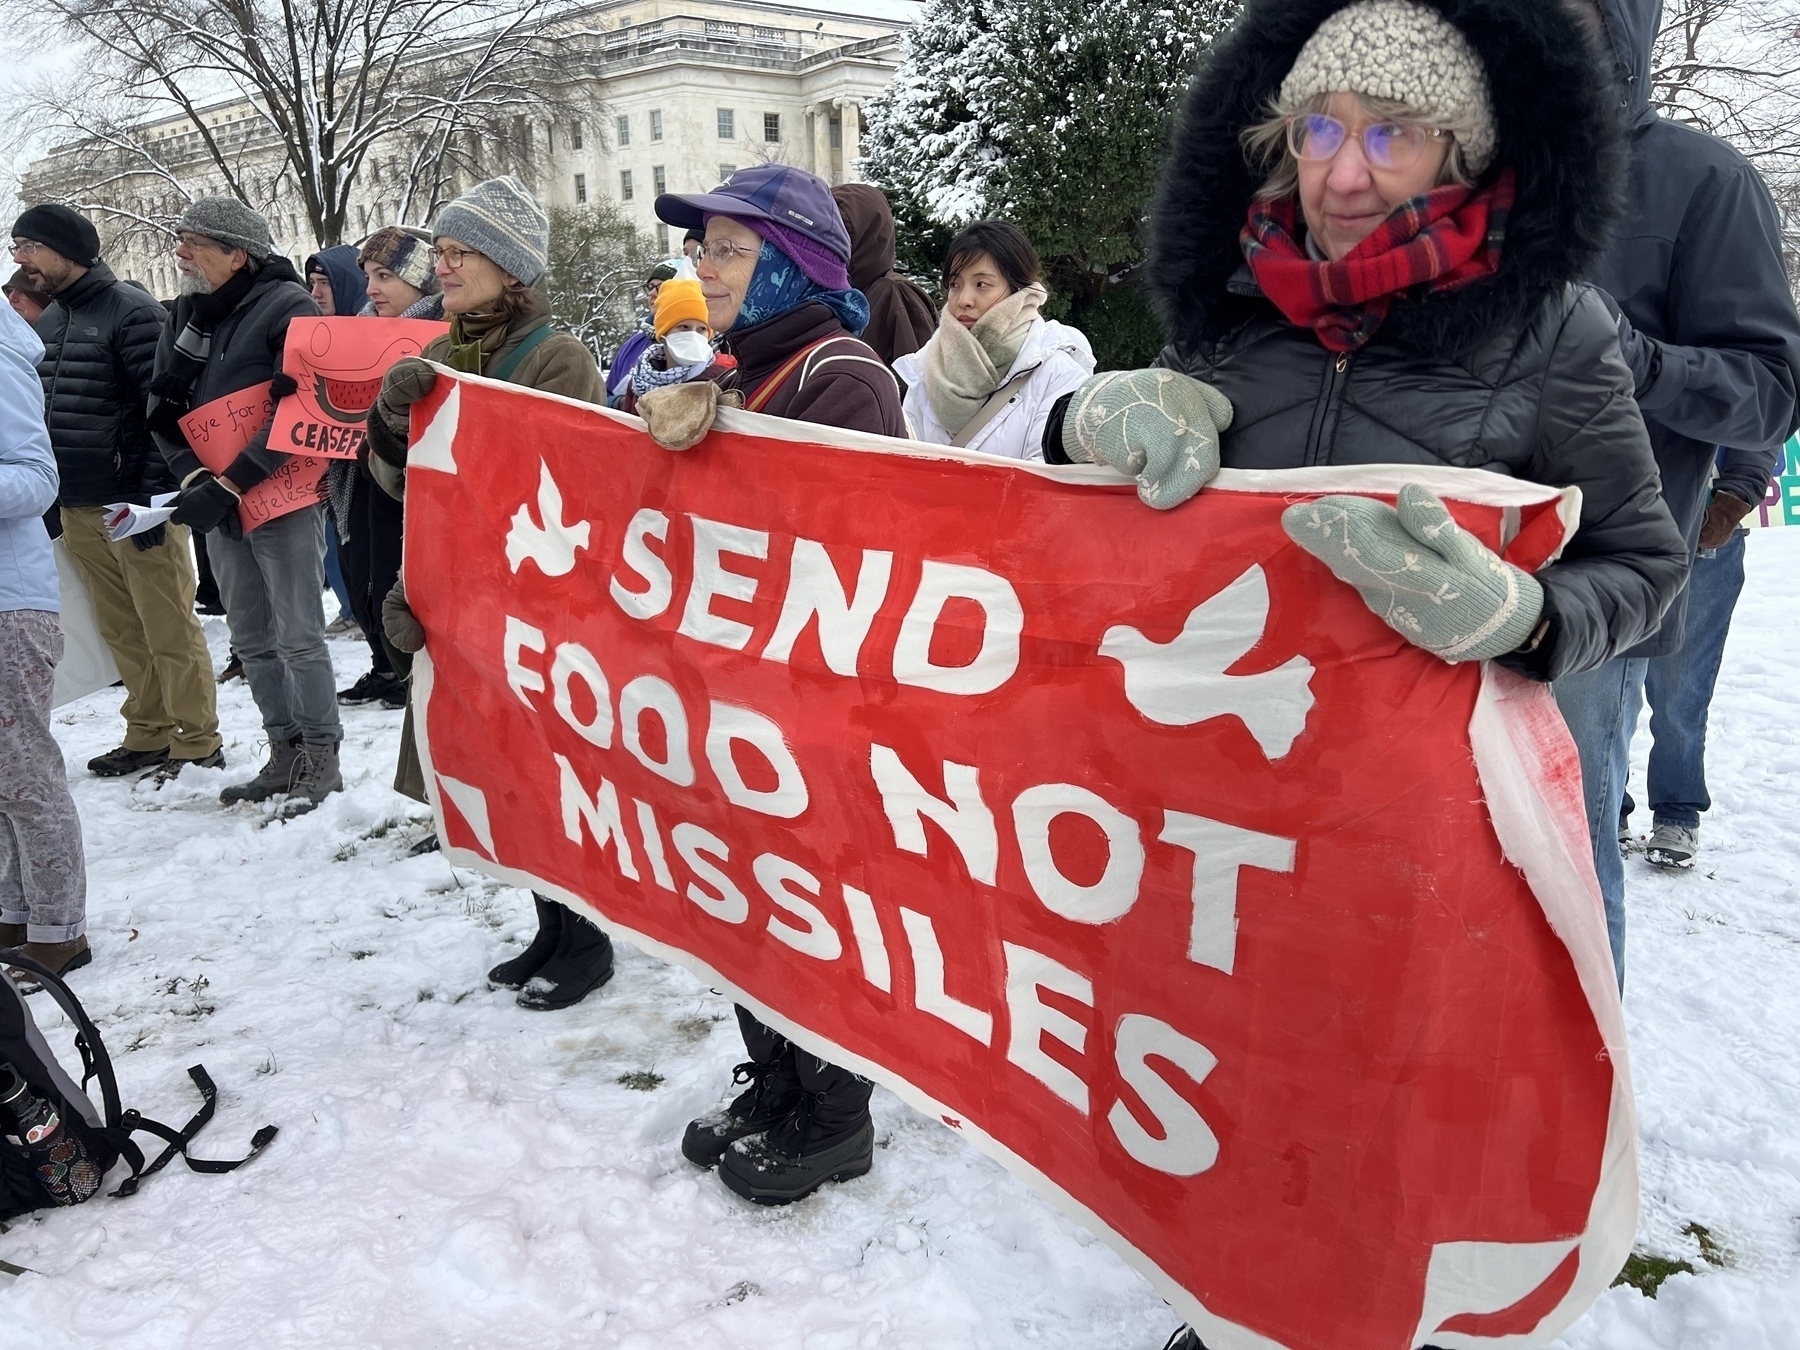 Mennonites outside with a banner that reads “send food not missiles”